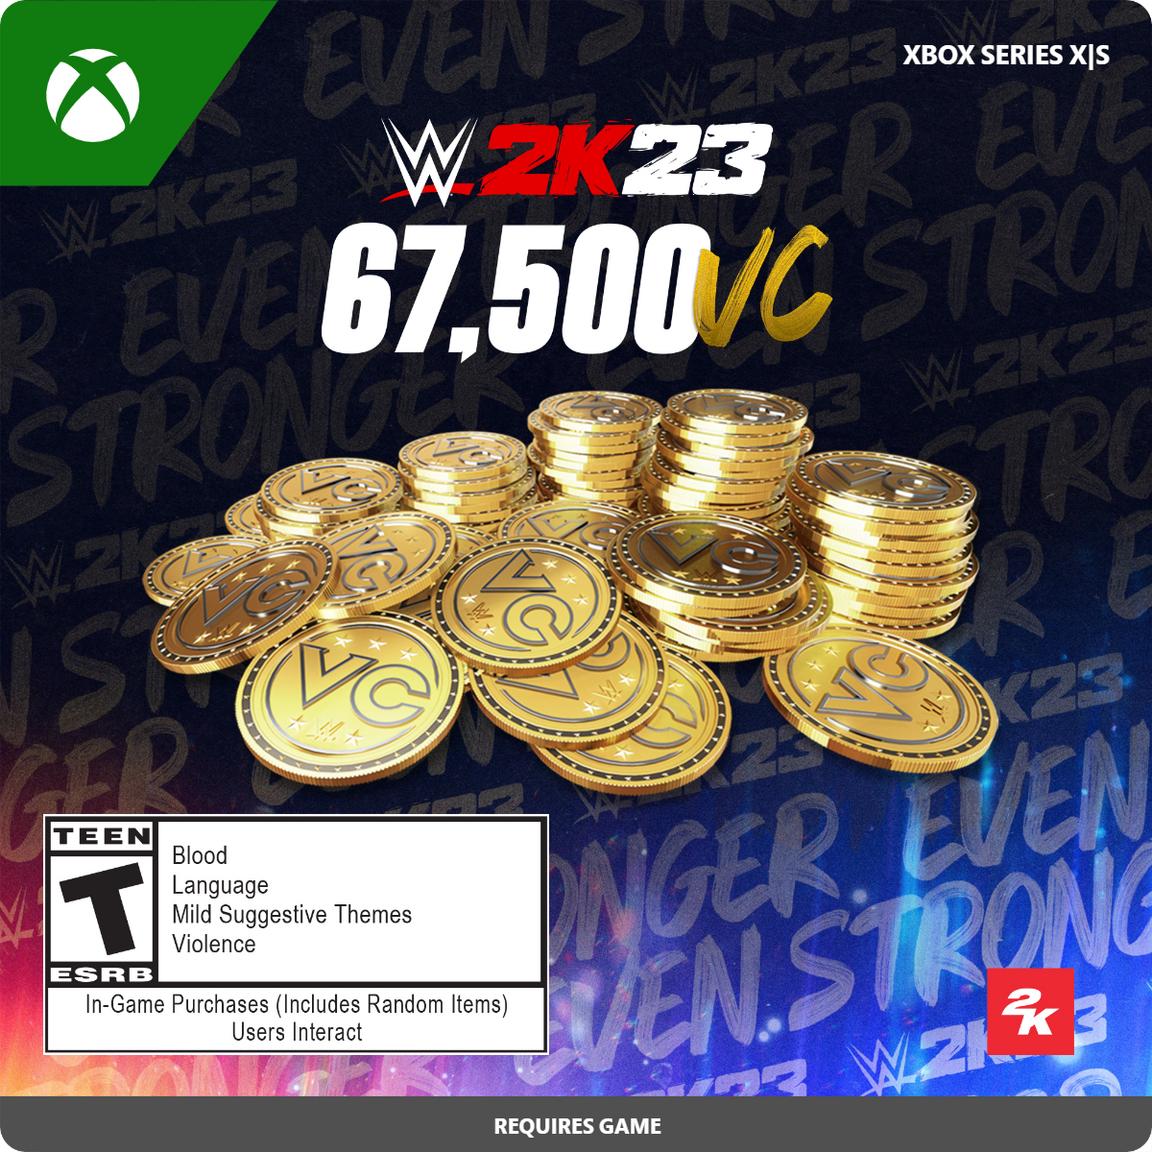 Take-Two Interactive WWE 2K23: 67,500 Virtual Currency Pack - Xbox Series X/S